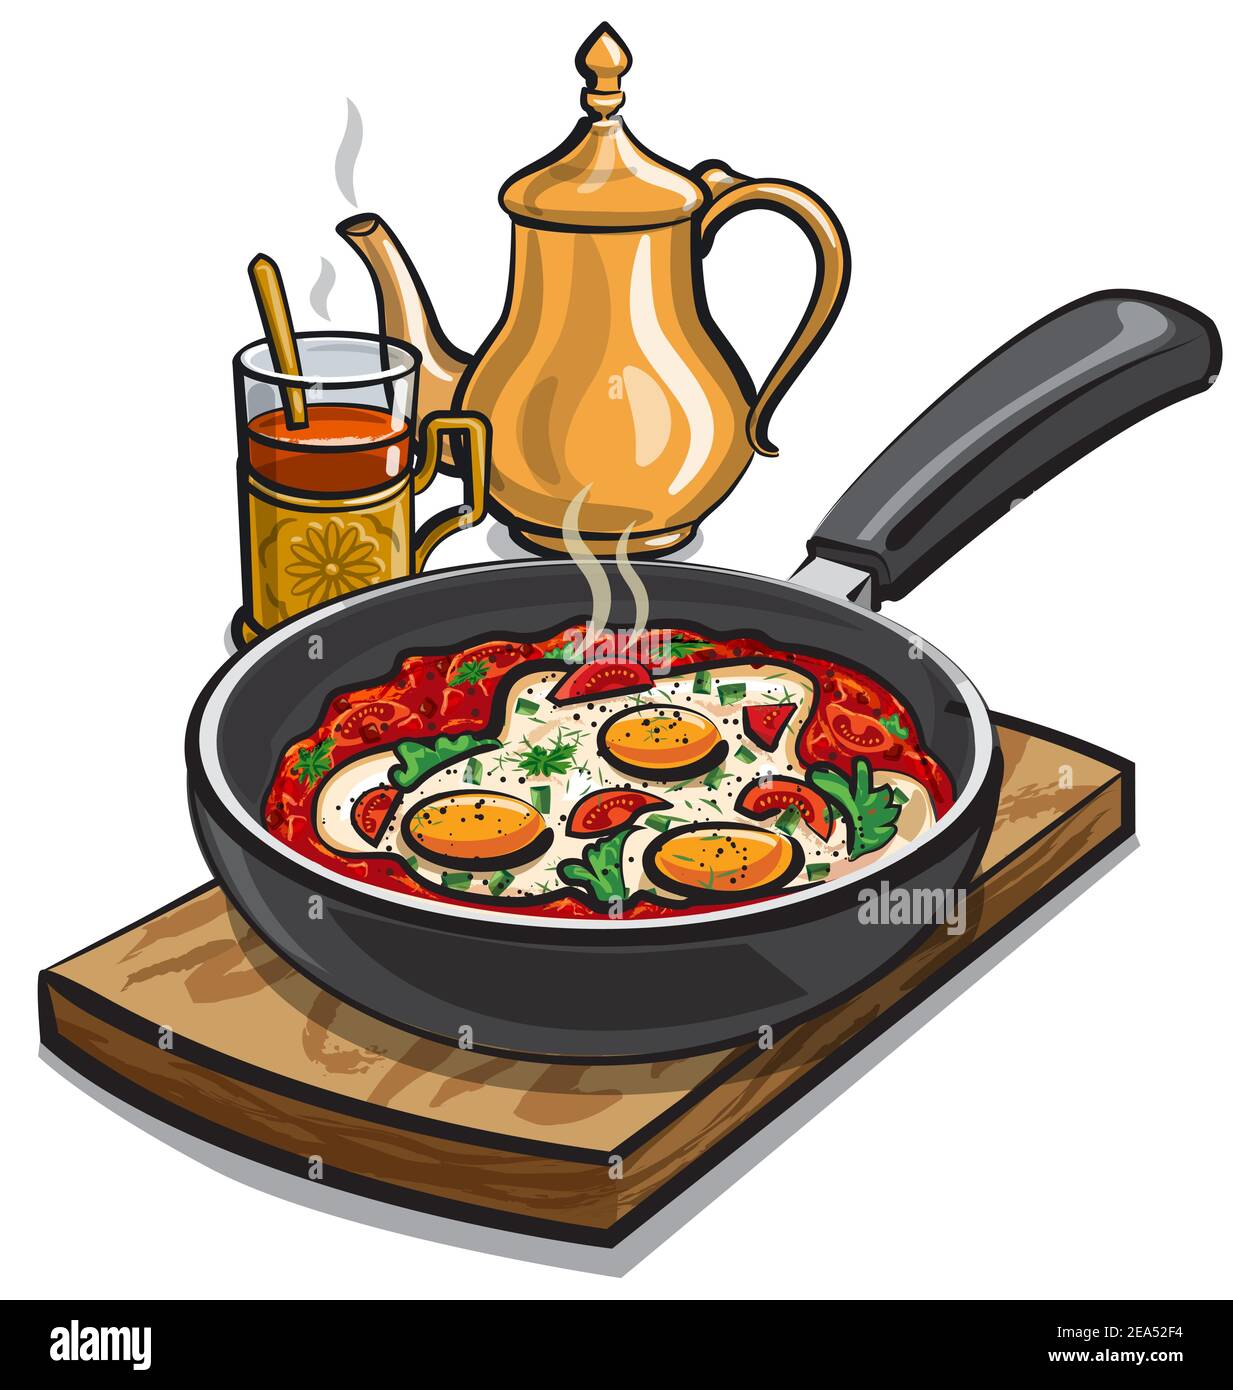 illustration of the shakshouka dish, scrambled eggs with tomatoes on the pan Stock Vector